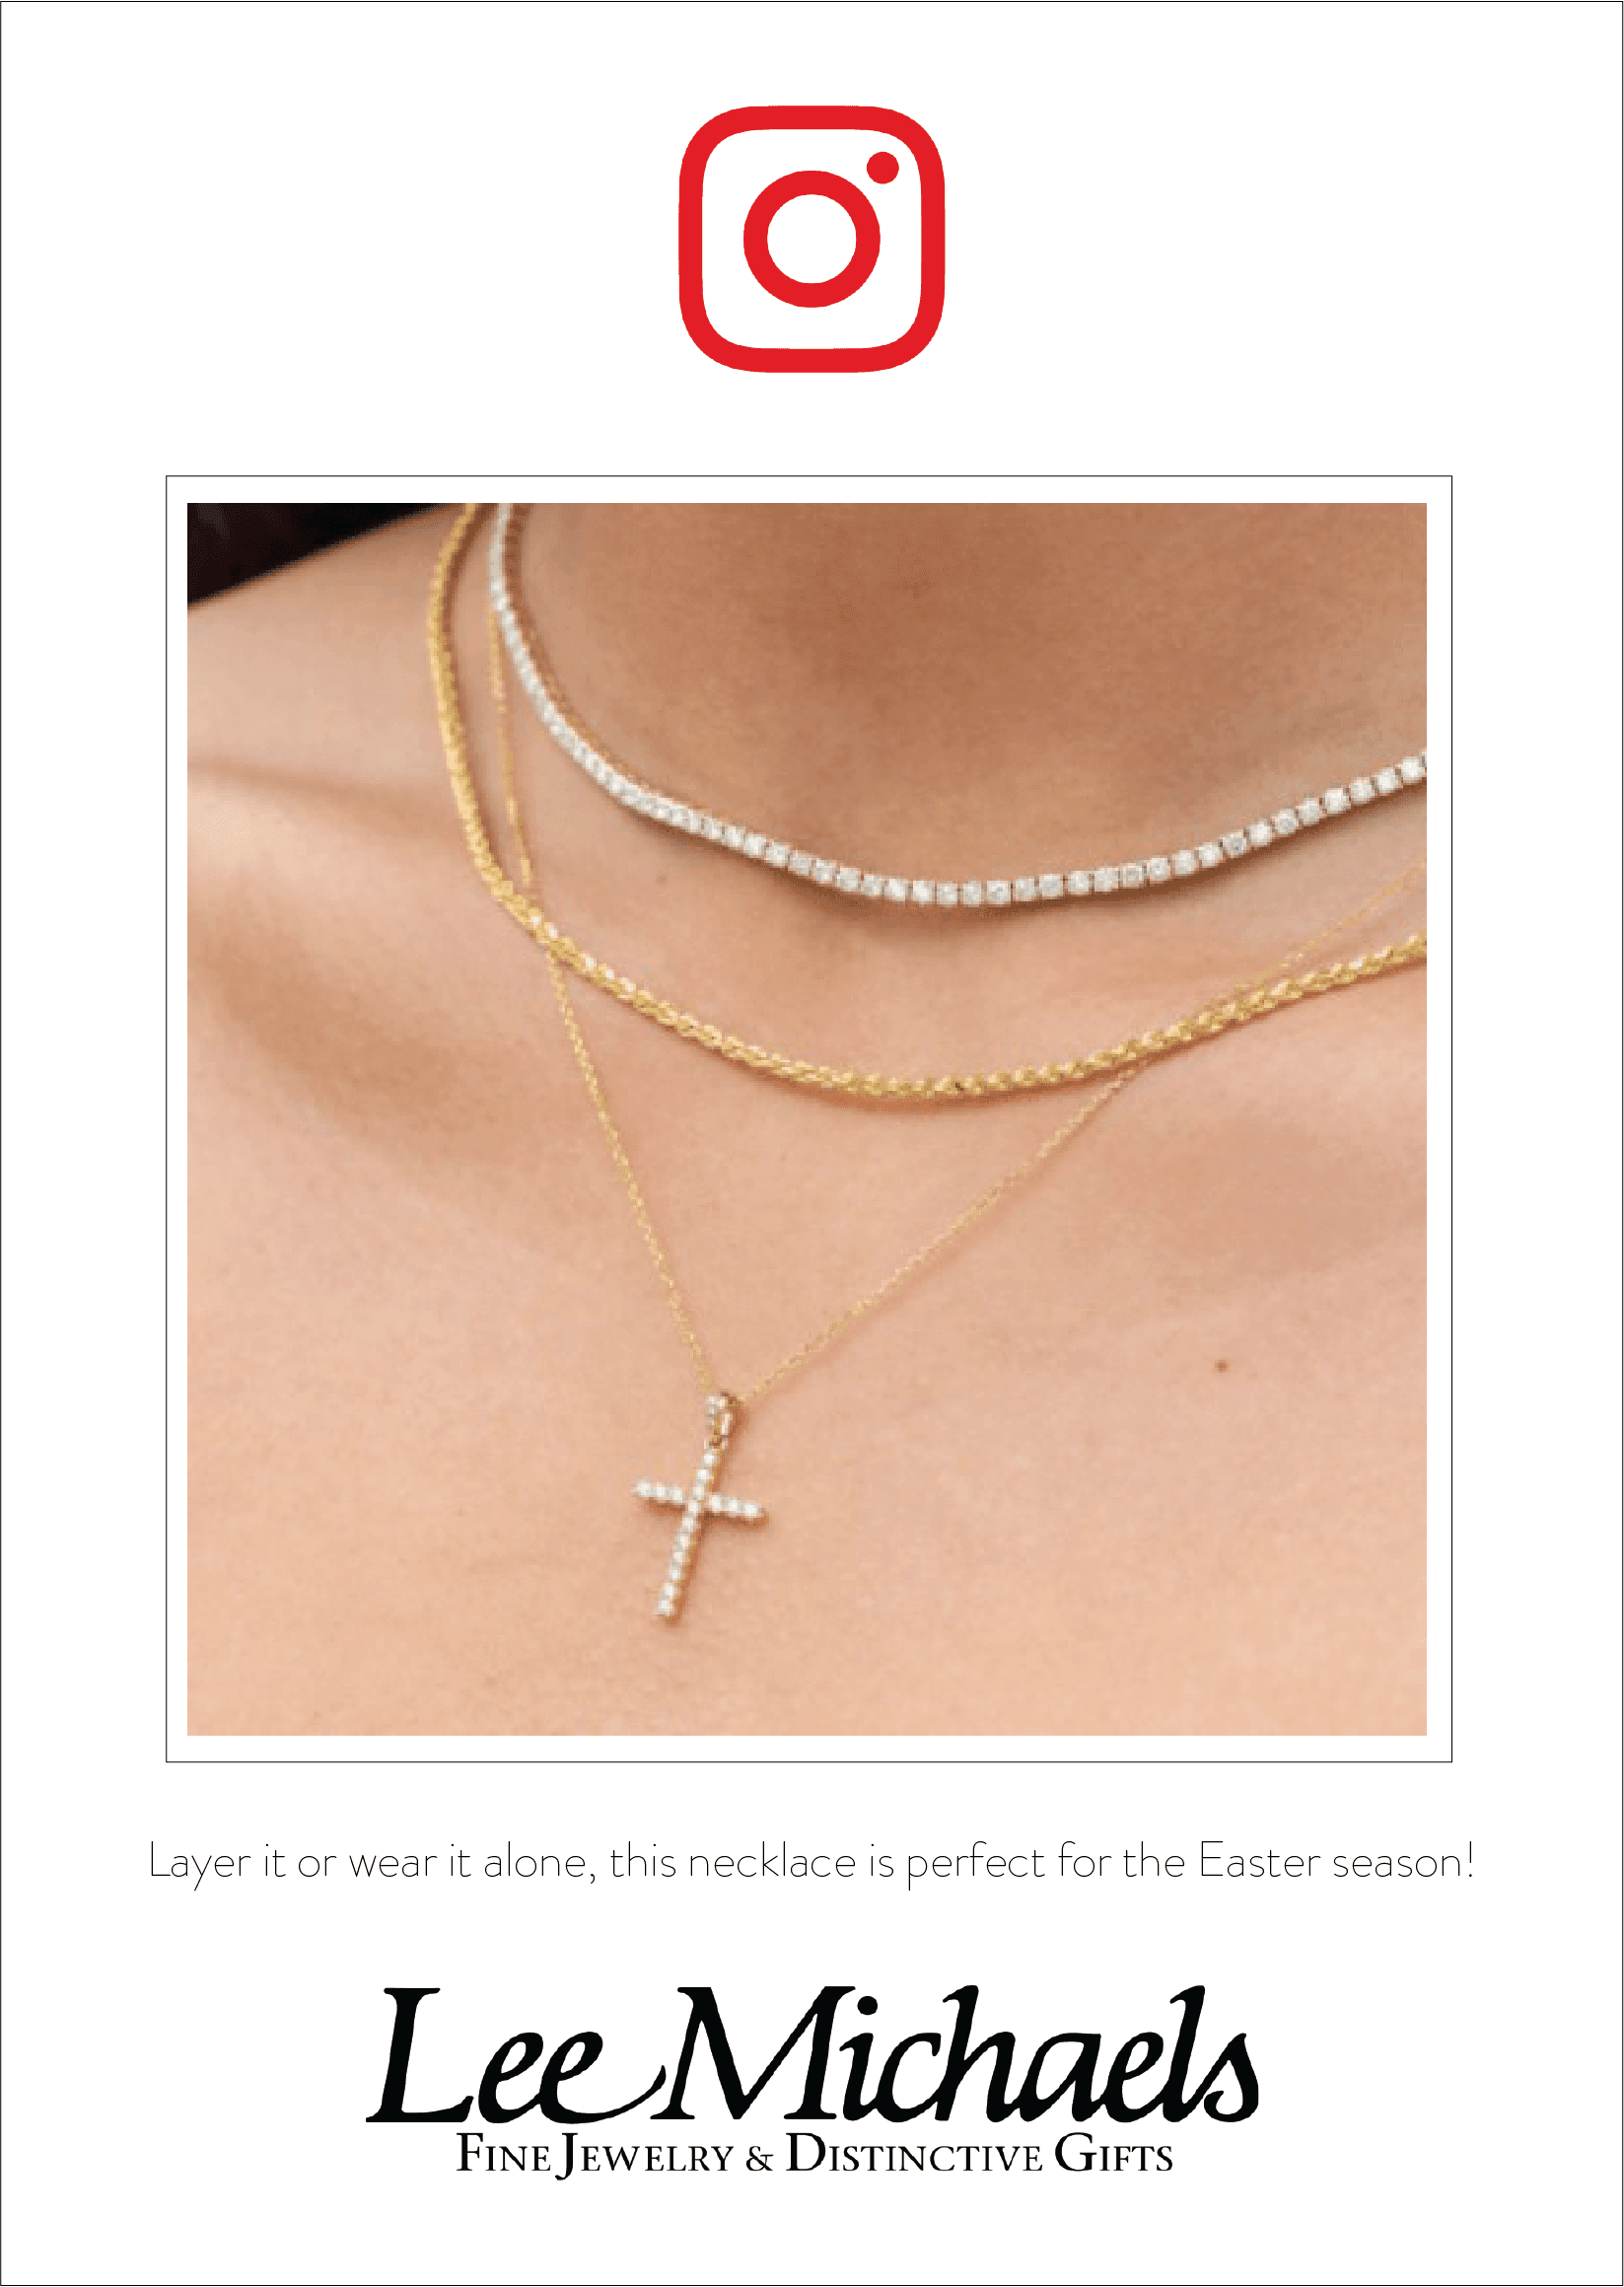 stacked necklace featuring diamond cross for Easter giveaway on @LMFJ for instagram